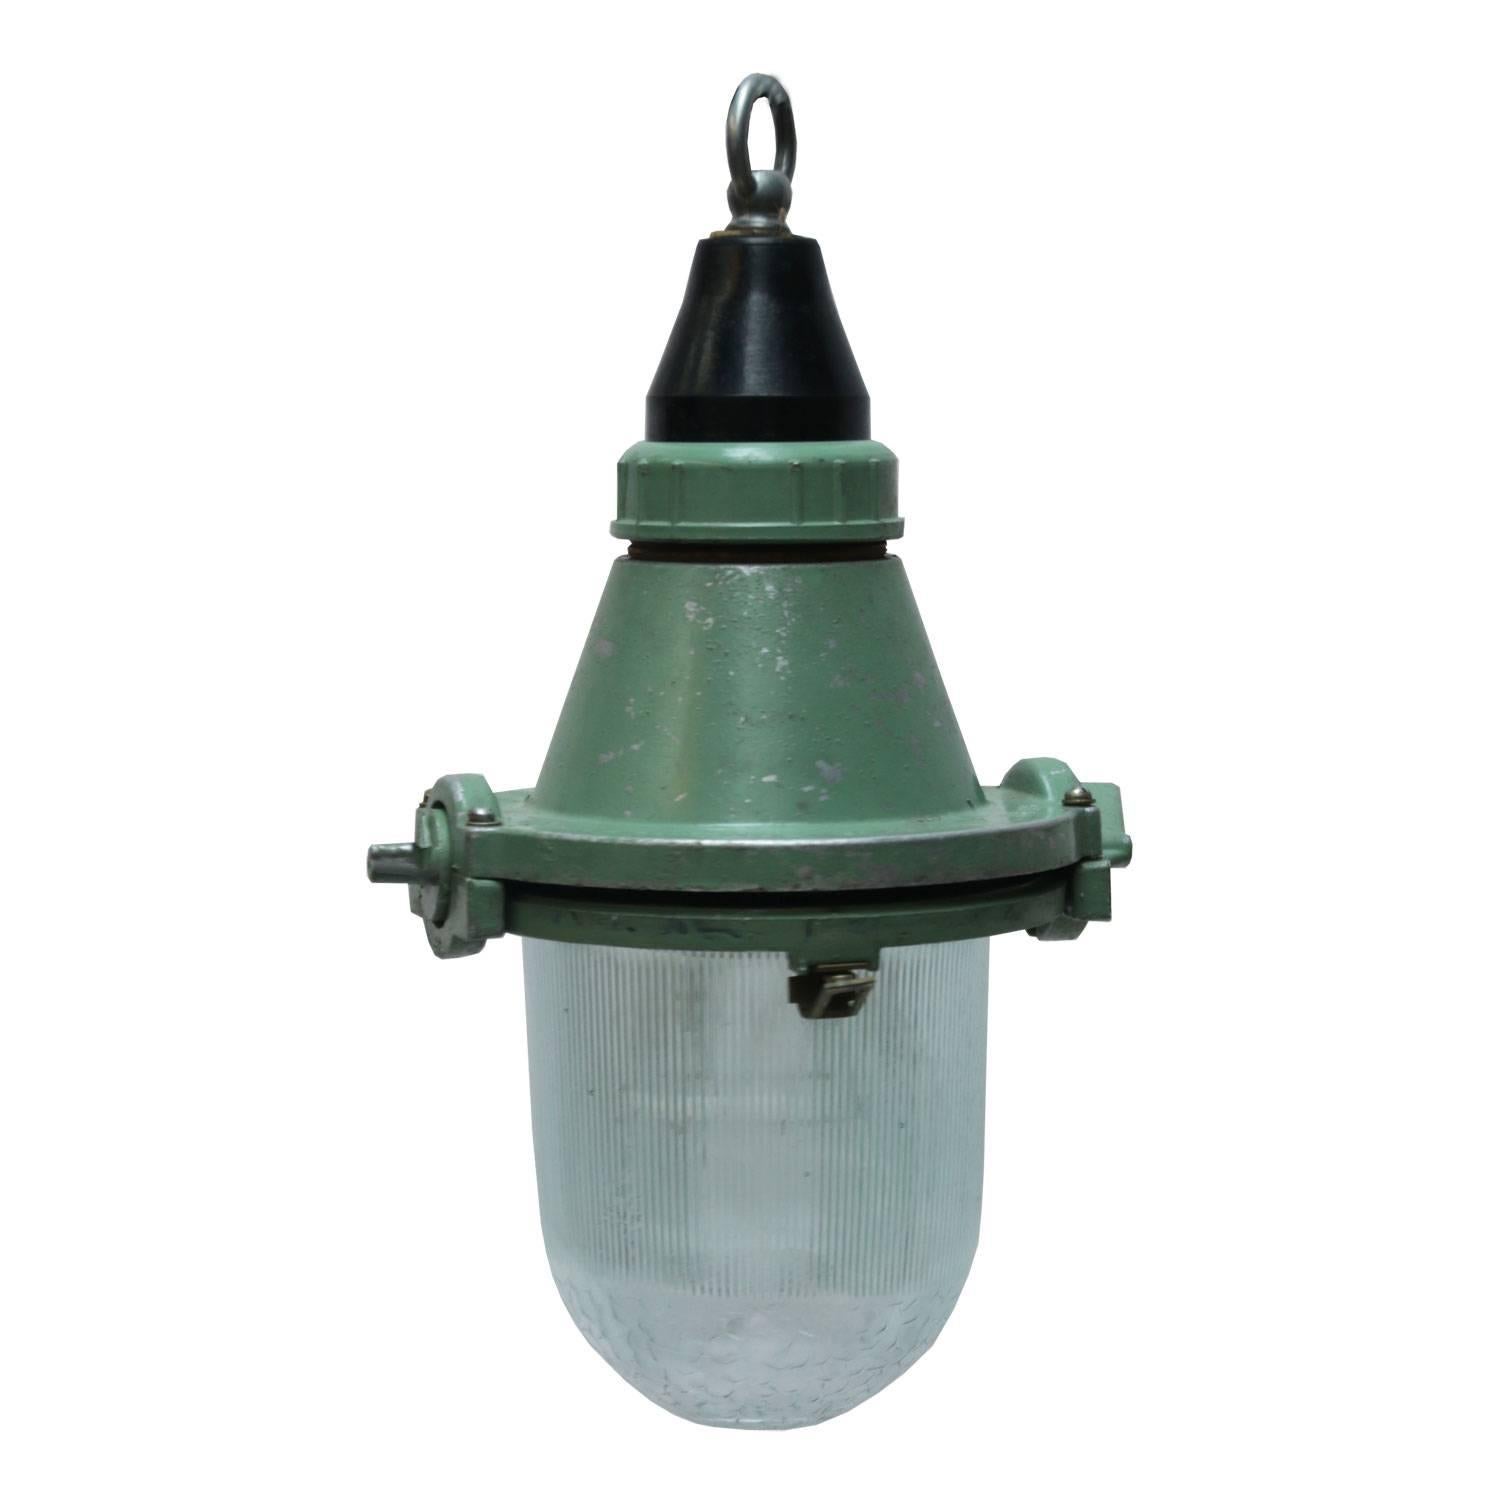 Small green industrial light with Holophane glass. 

Weight: 1.5 kg / 3.3 lb

All lamps have been made suitable by international standards for incandescent light bulbs, energy-efficient and LED bulbs. E26/E27 bulb holders and new wiring are CE